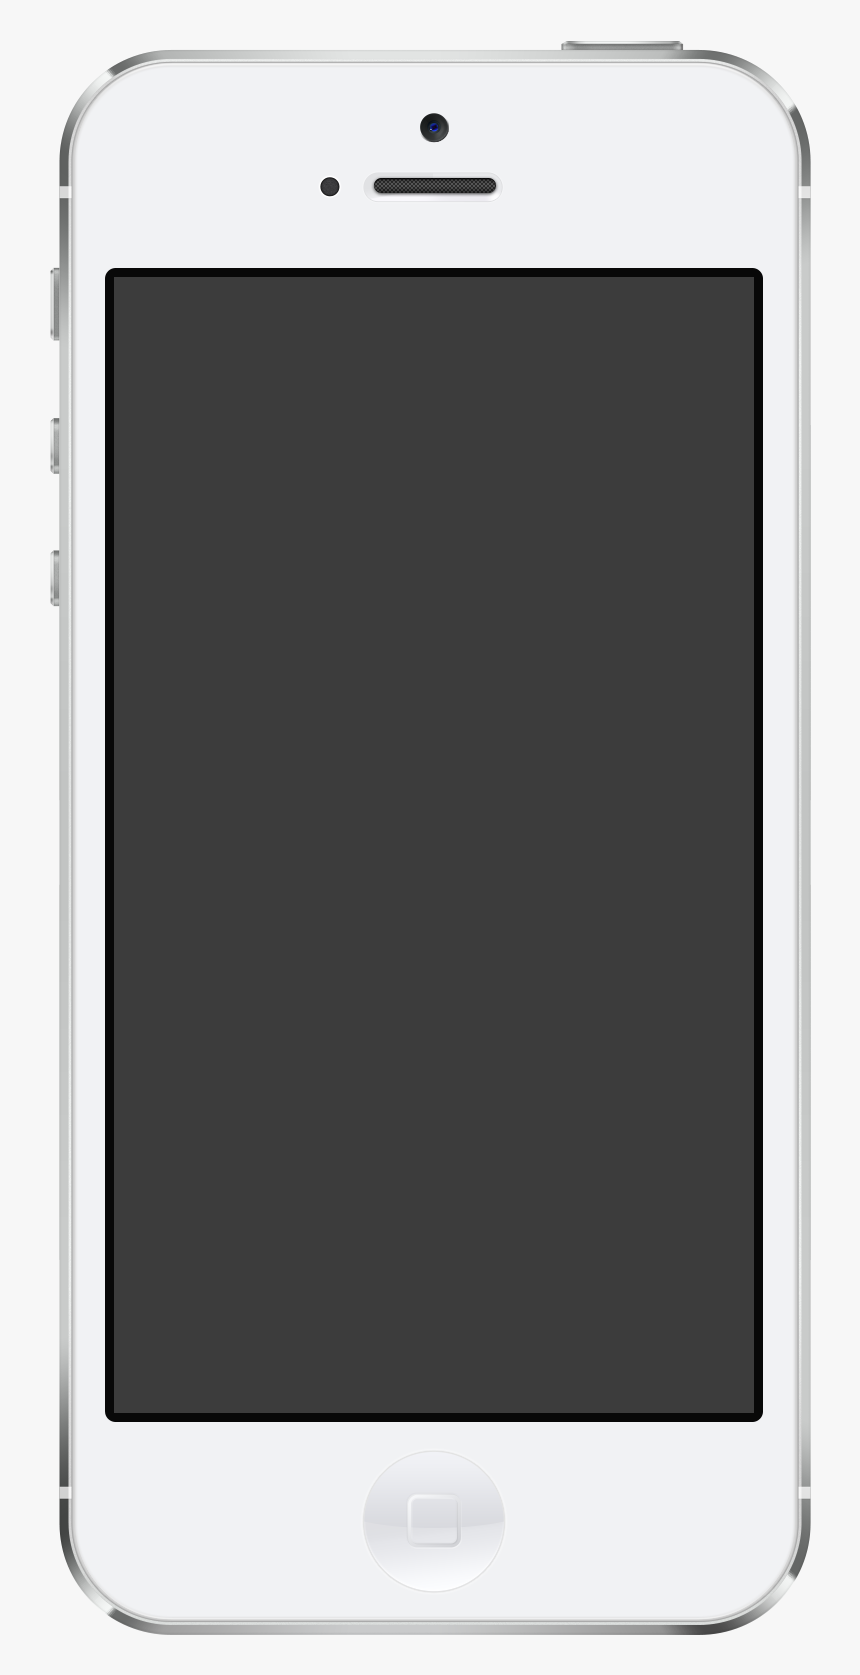 Apple Iphone Png Image - Sea Games 2017 Gif, Transparent Png, Free Download